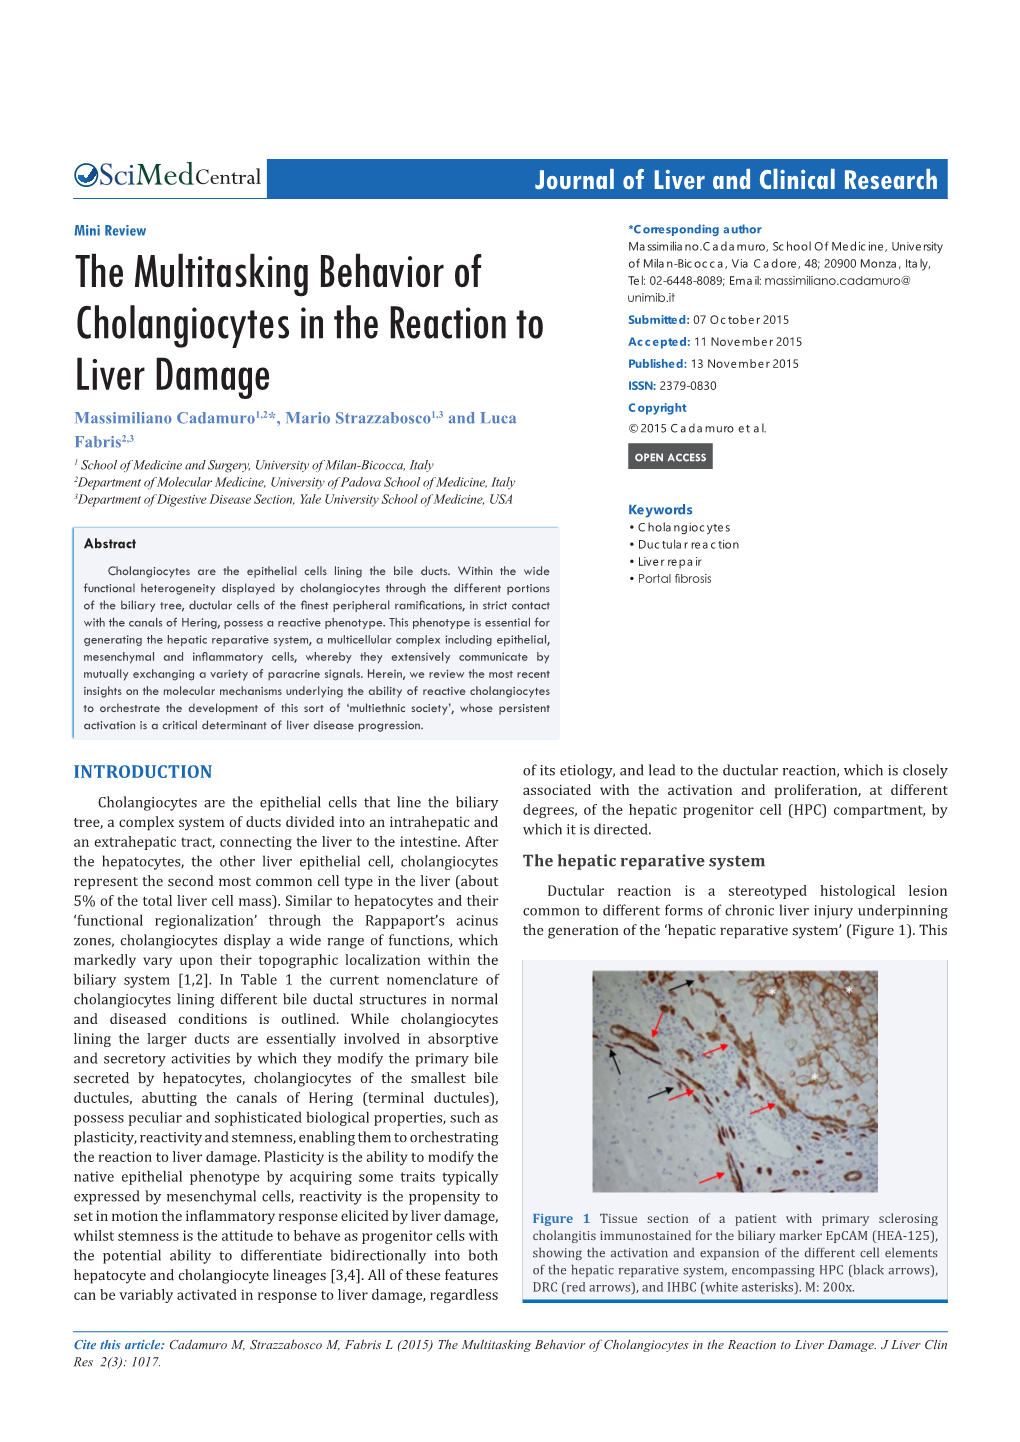 The Multitasking Behavior of Cholangiocytes in the Reaction to Liver Damage